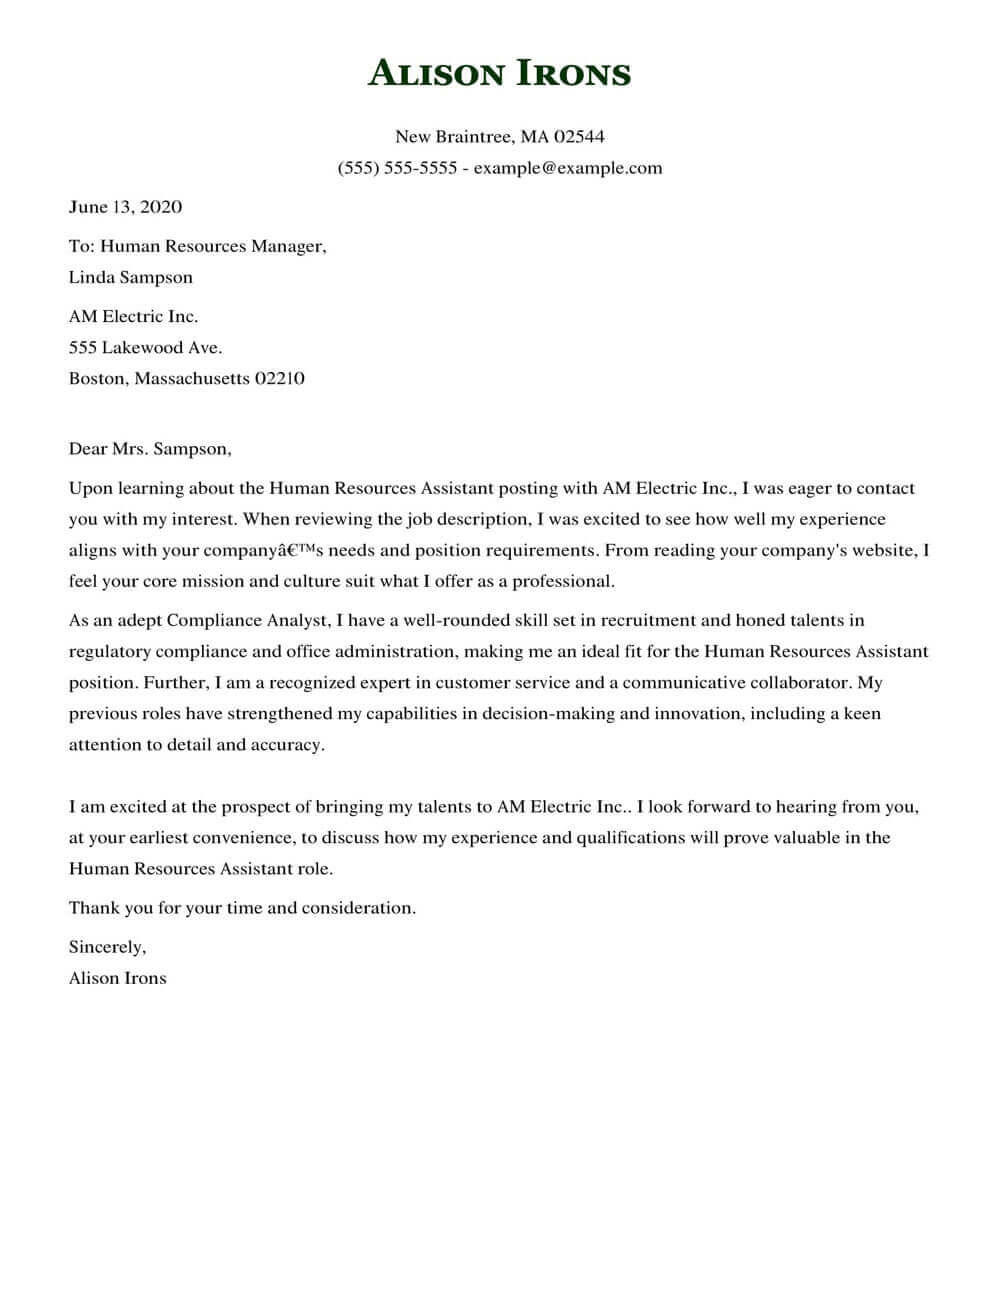 Sample Cover Letter For Human Resource Manager from www.jobhero.com